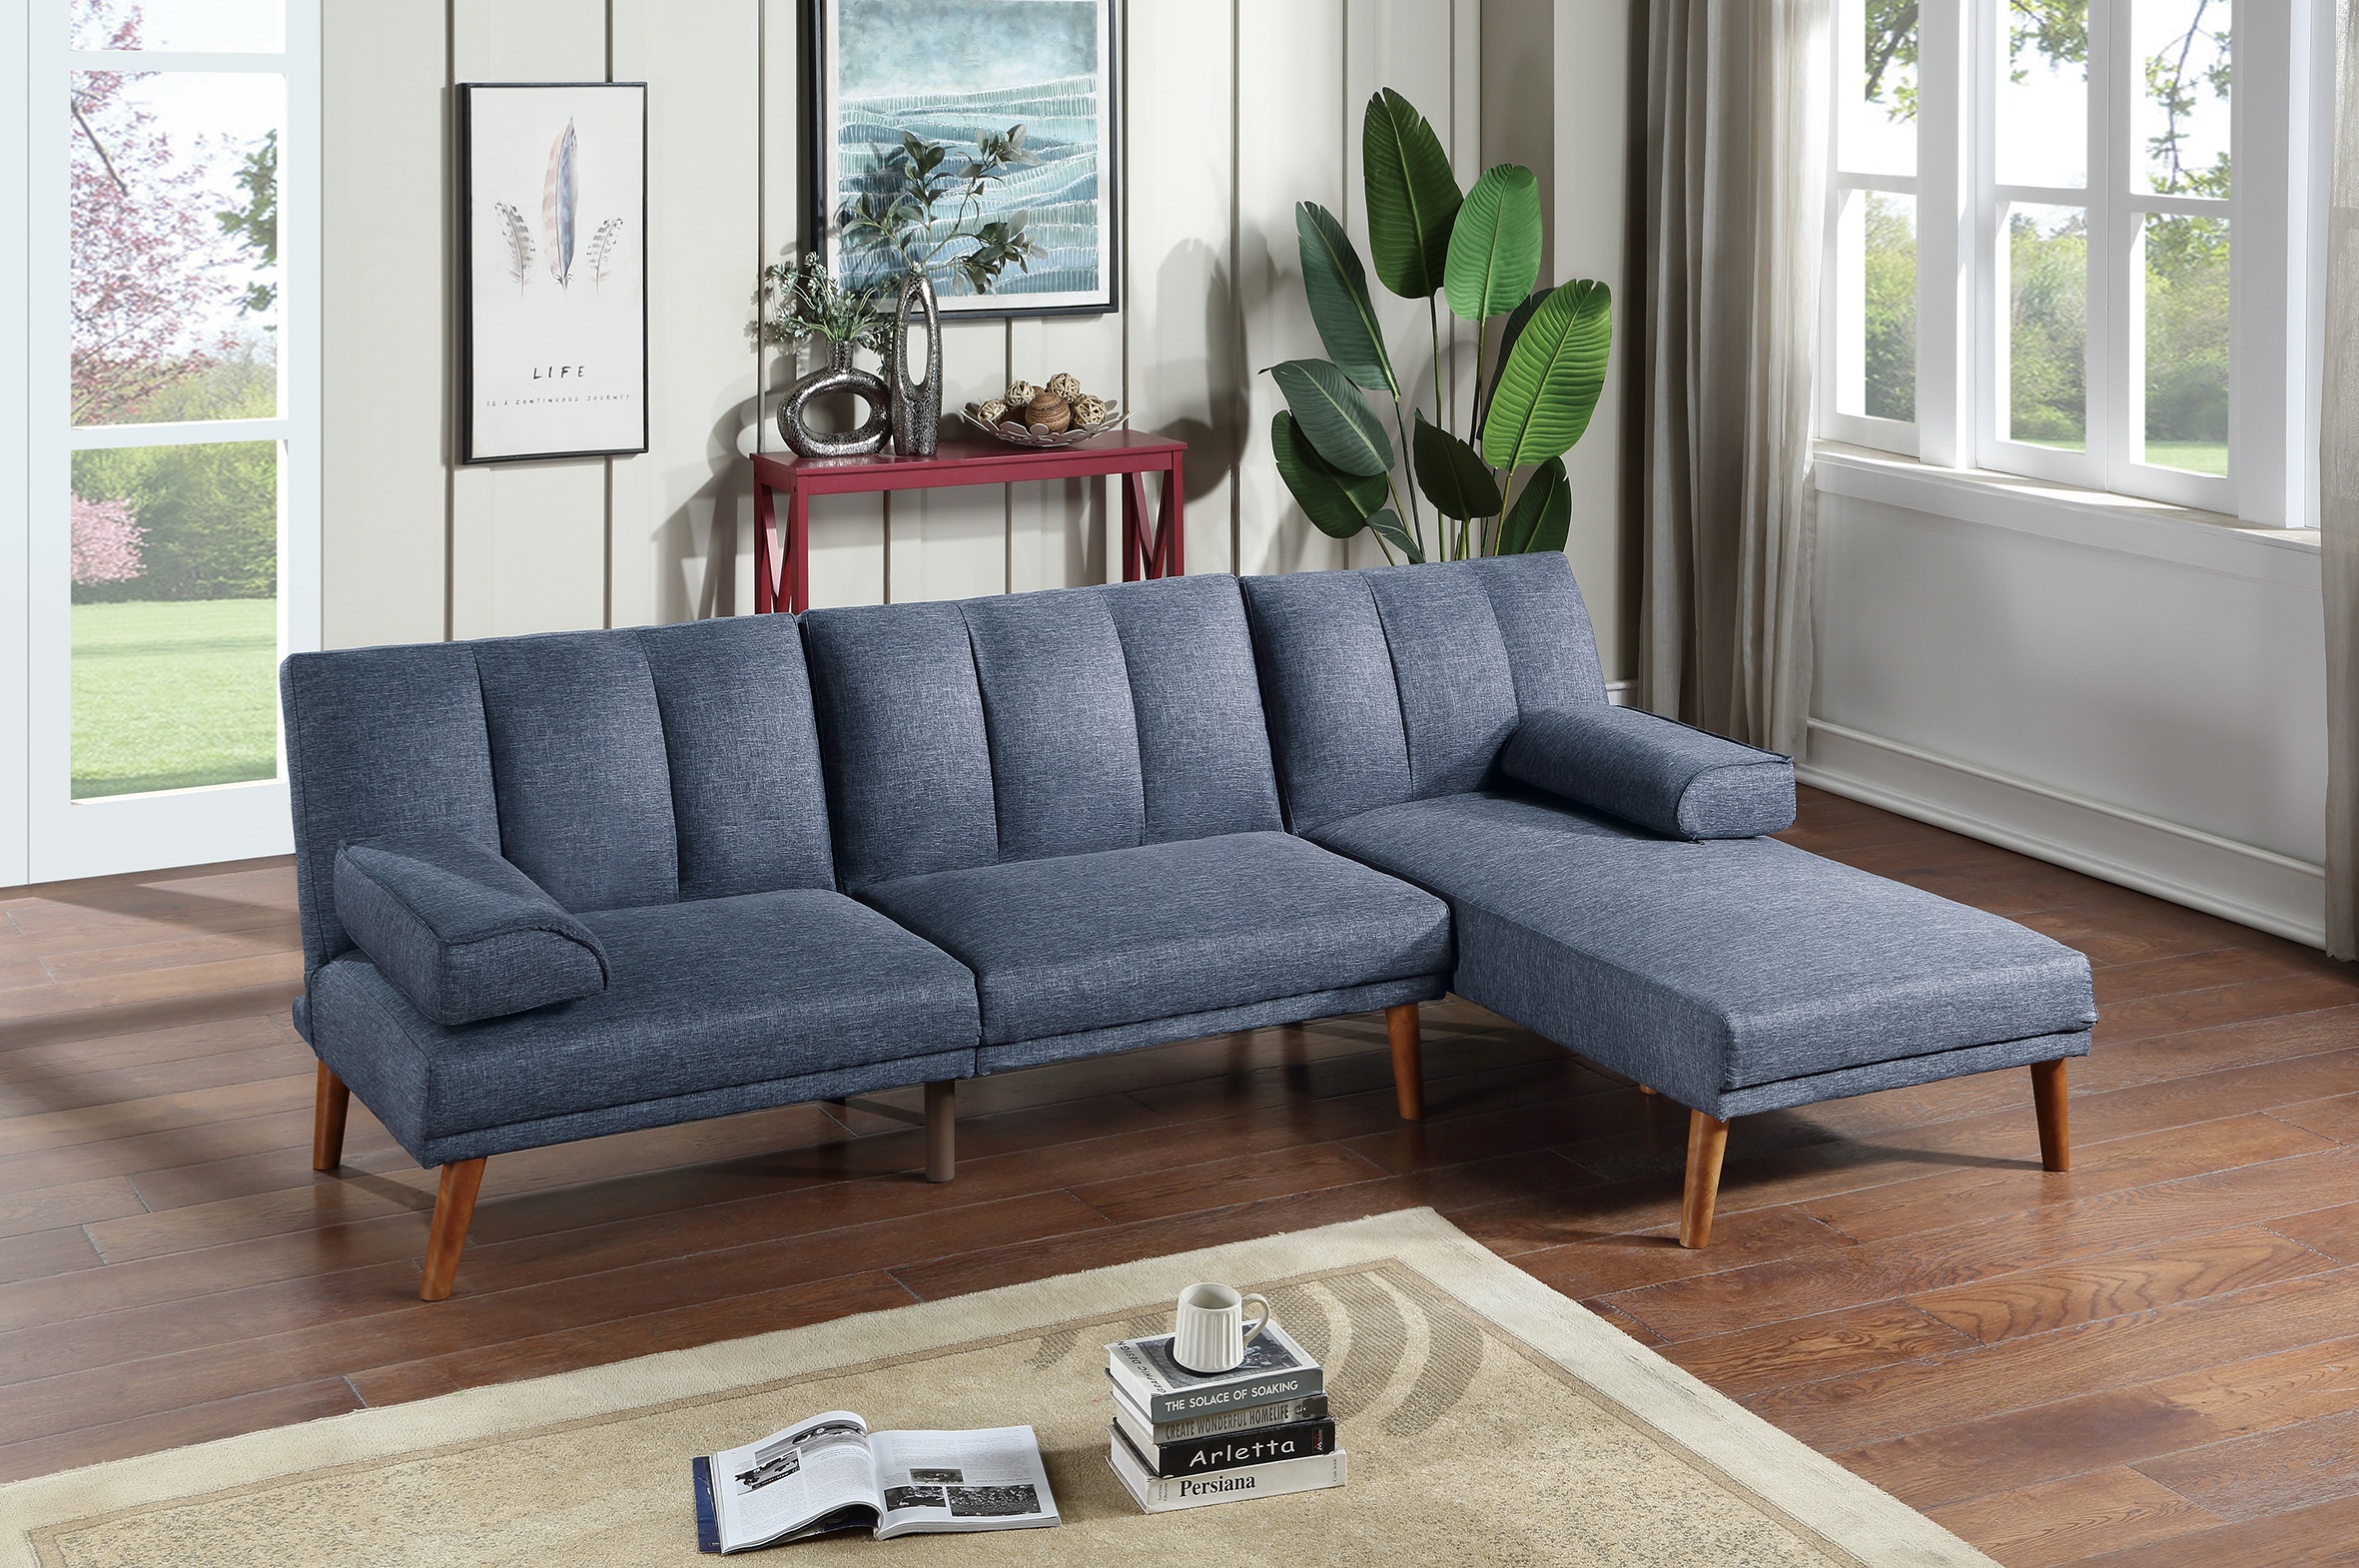 Navy Color Polyfiber Sectional Sofa Set Living Room Furniture Solid wood Legs Plush Couch Adjustable Sofa Chaise-Boyel Living